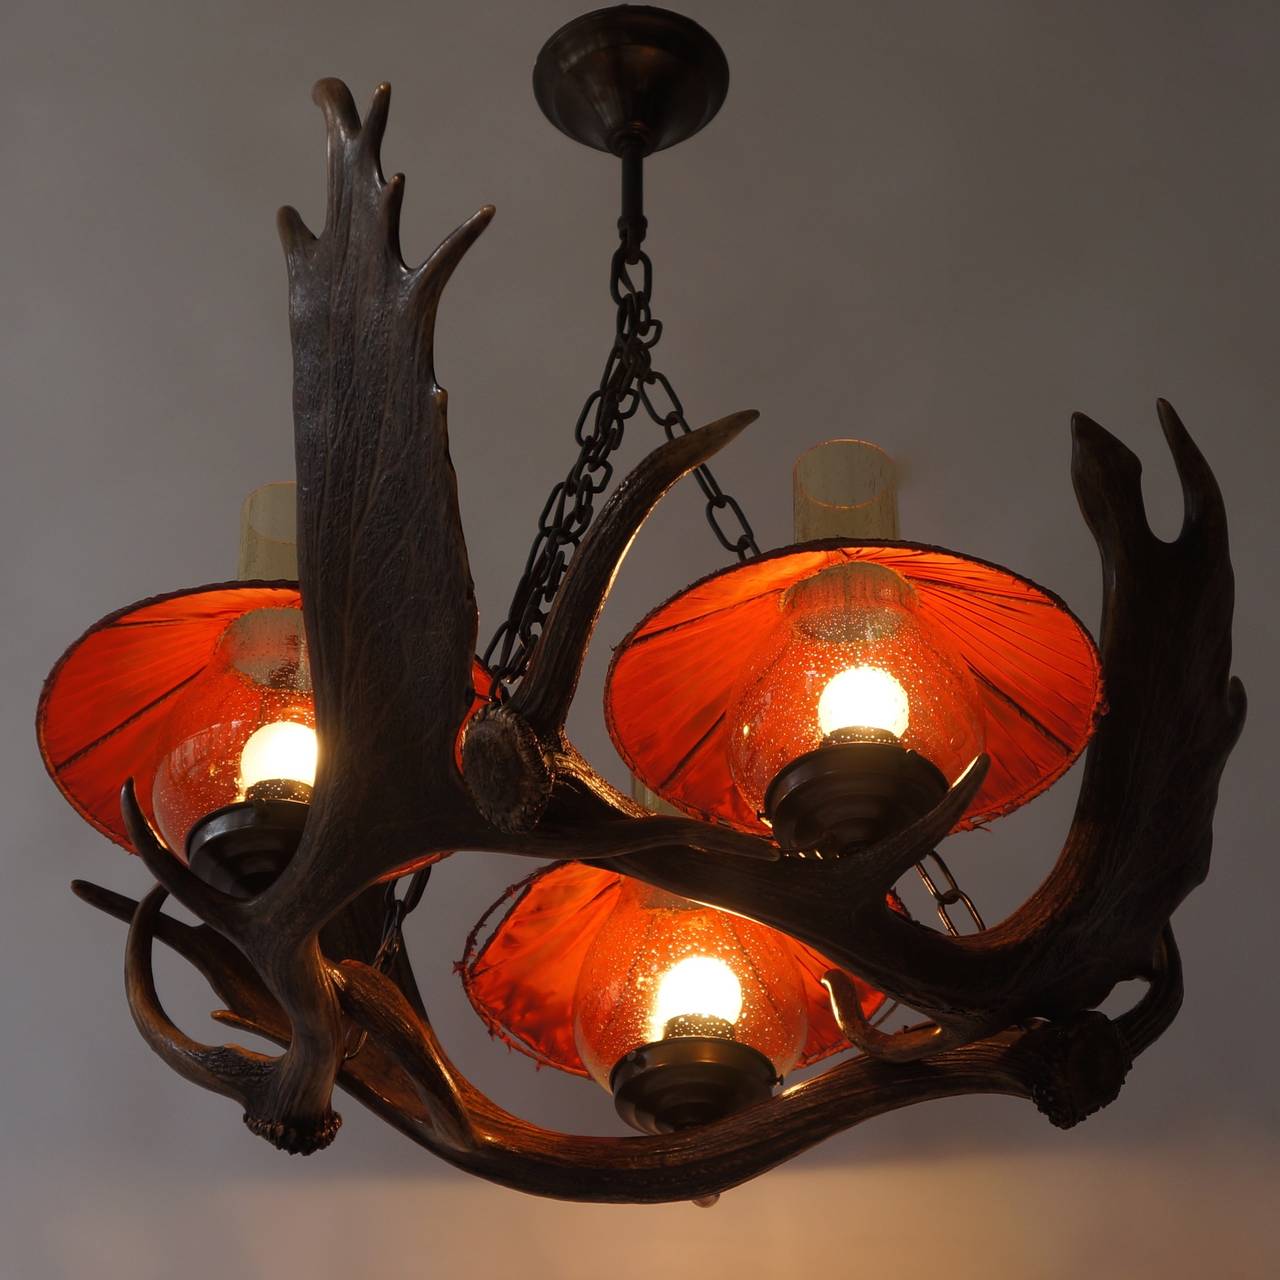 Antler three lights chandelier, Italy, circa 1940s.
The lampshade are worn but beautiful.